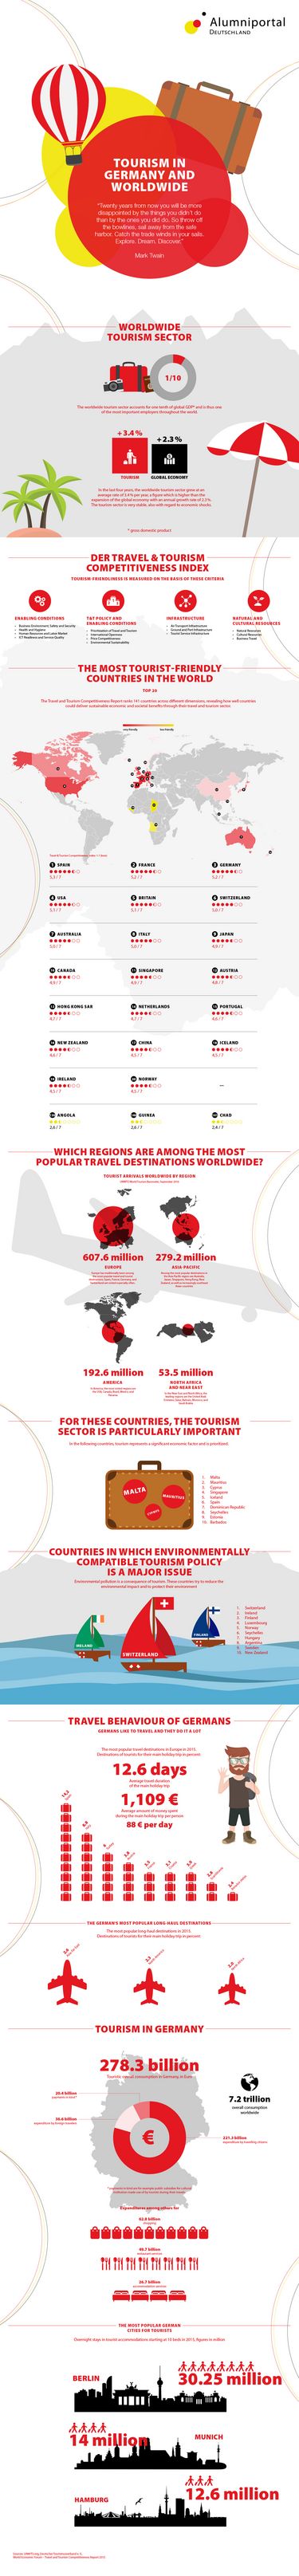 Infographics: Tourism in Germany and worldwide